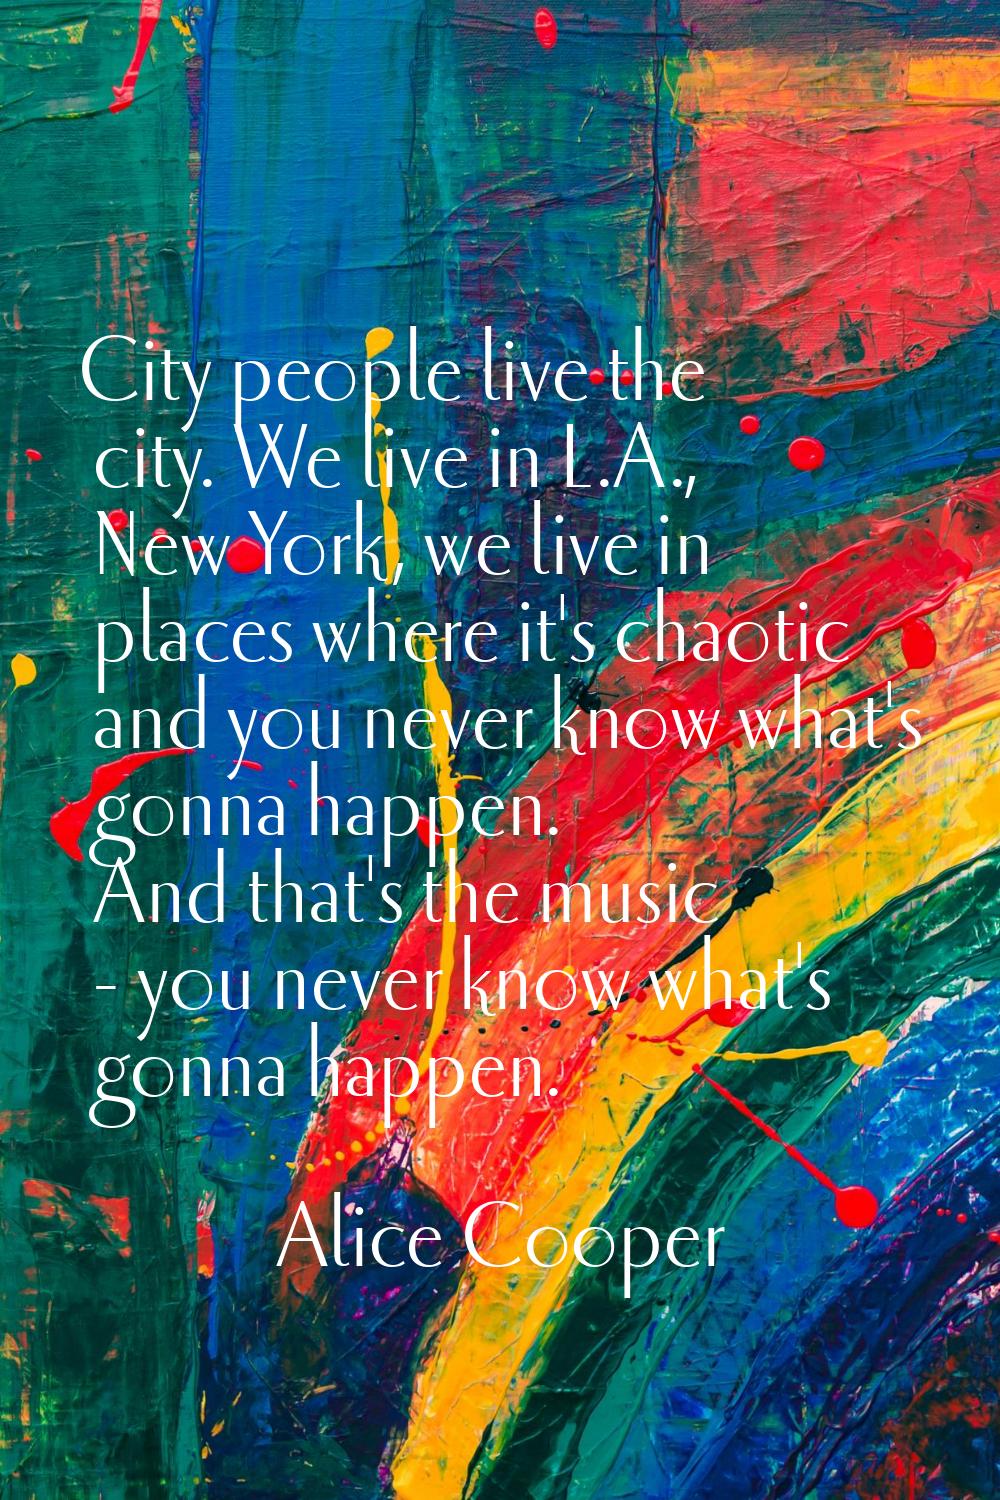 City people live the city. We live in L.A., New York, we live in places where it's chaotic and you 